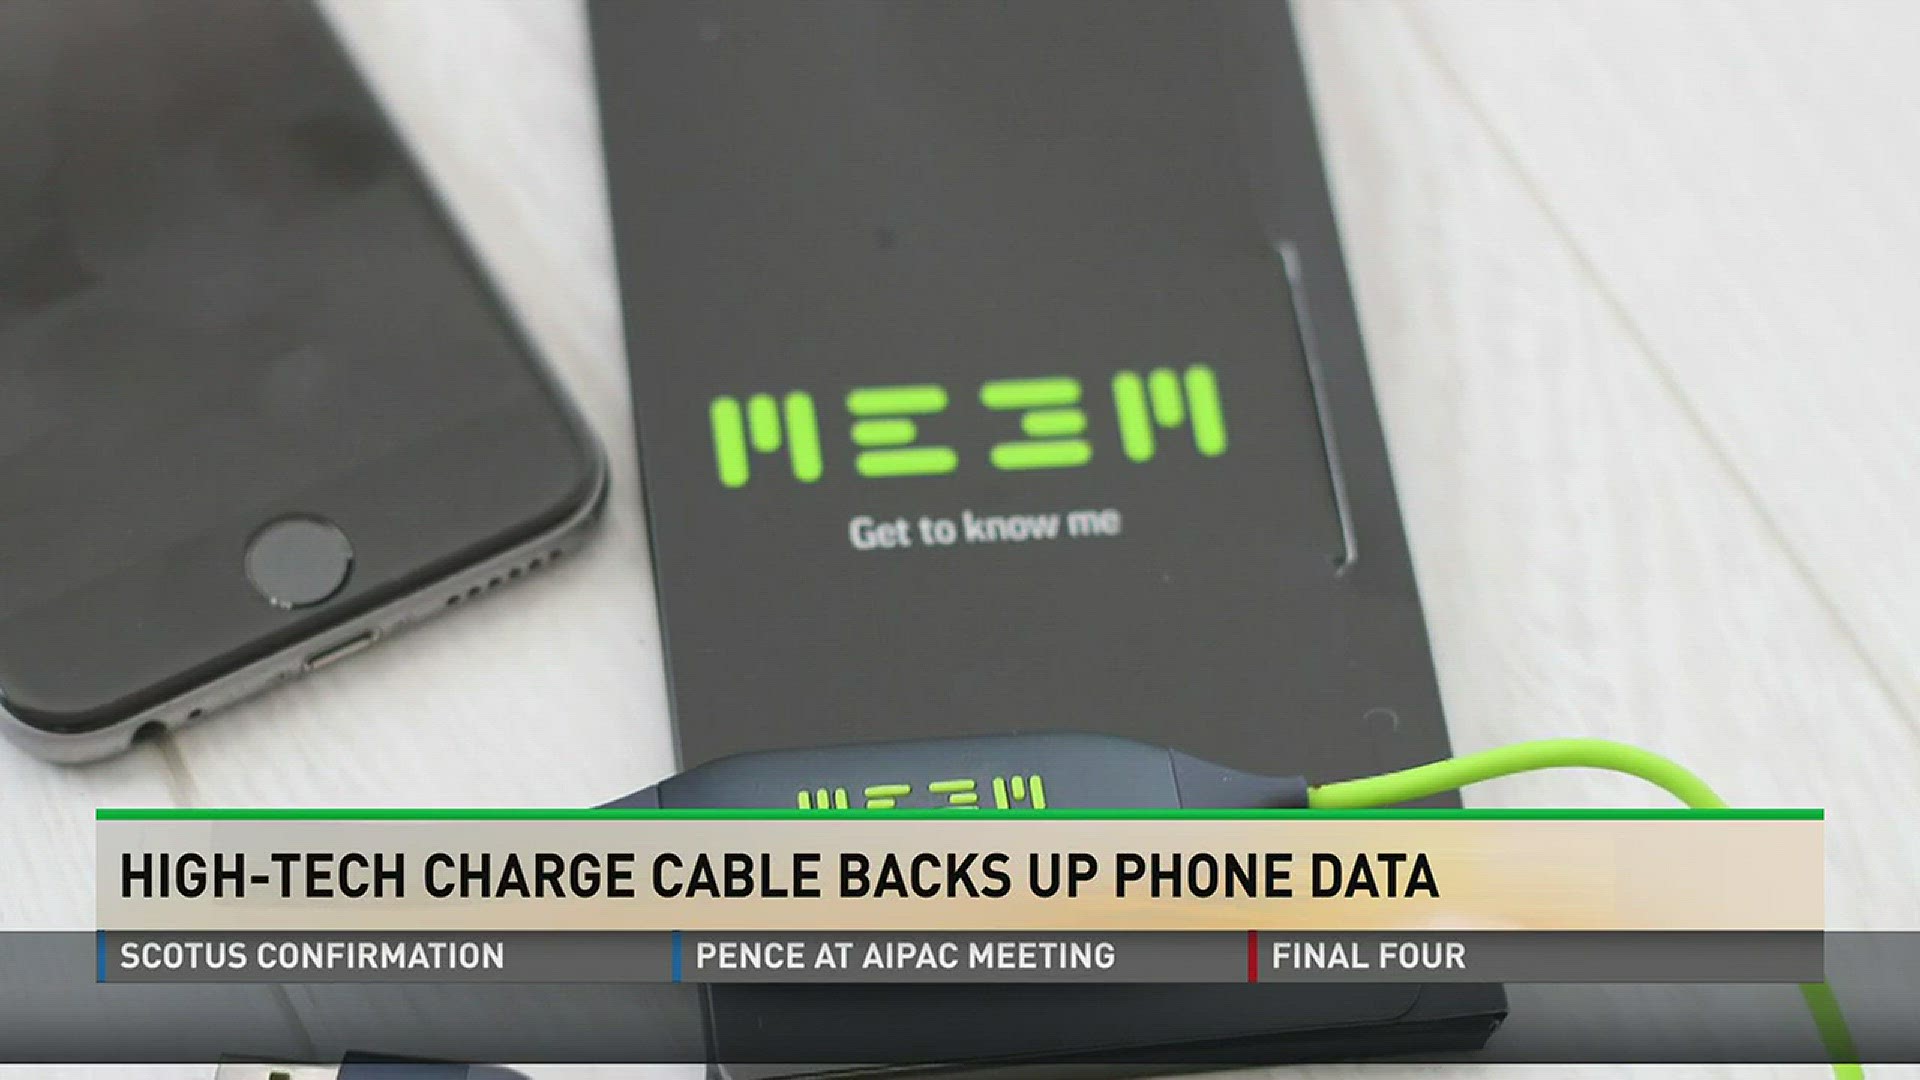 Money man Matt Granite features a high-tech charge cable that backs phone data.